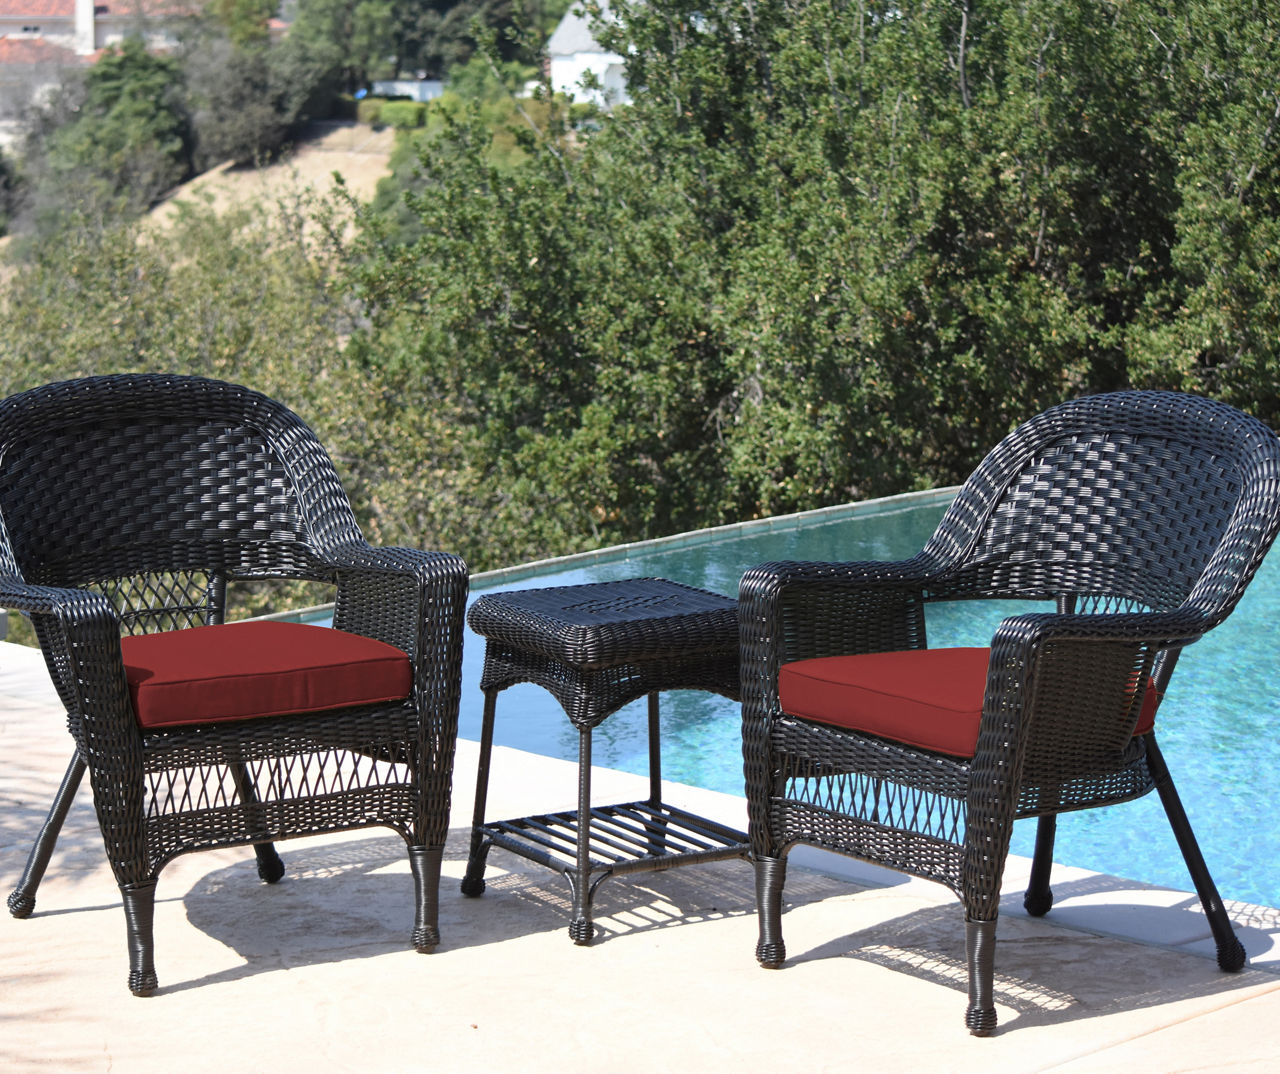 3PC BLK WICKER CHAIR SET W RED CUSHIONS